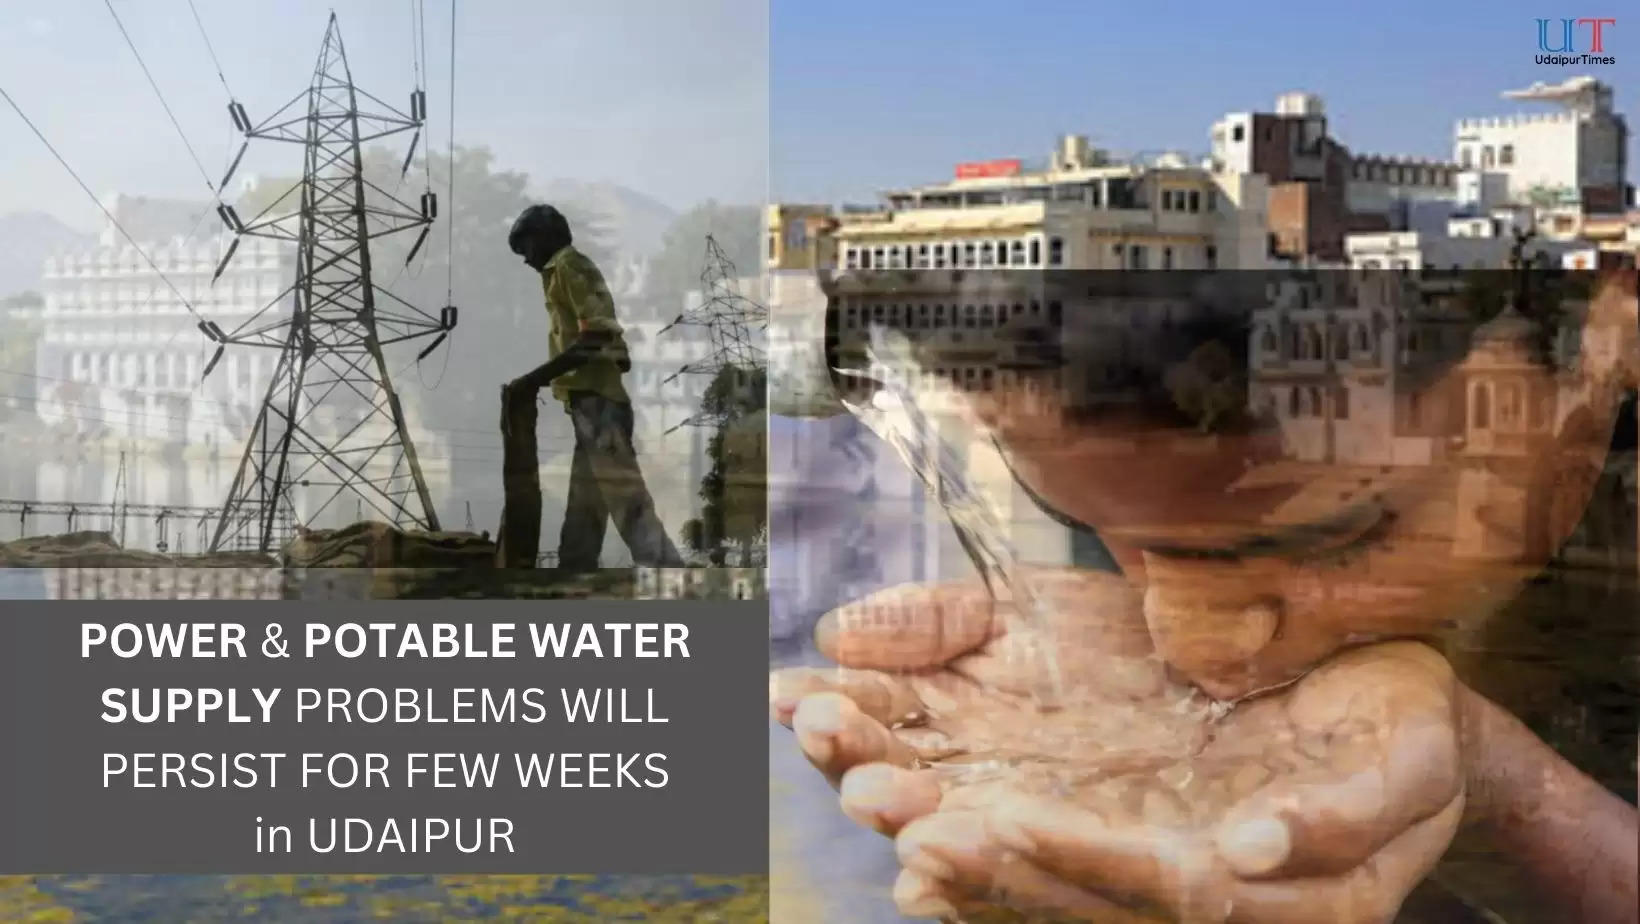 Providing regular Drinking Water and Power Supply will be a Challenge this Summer, says Udaipur Collector